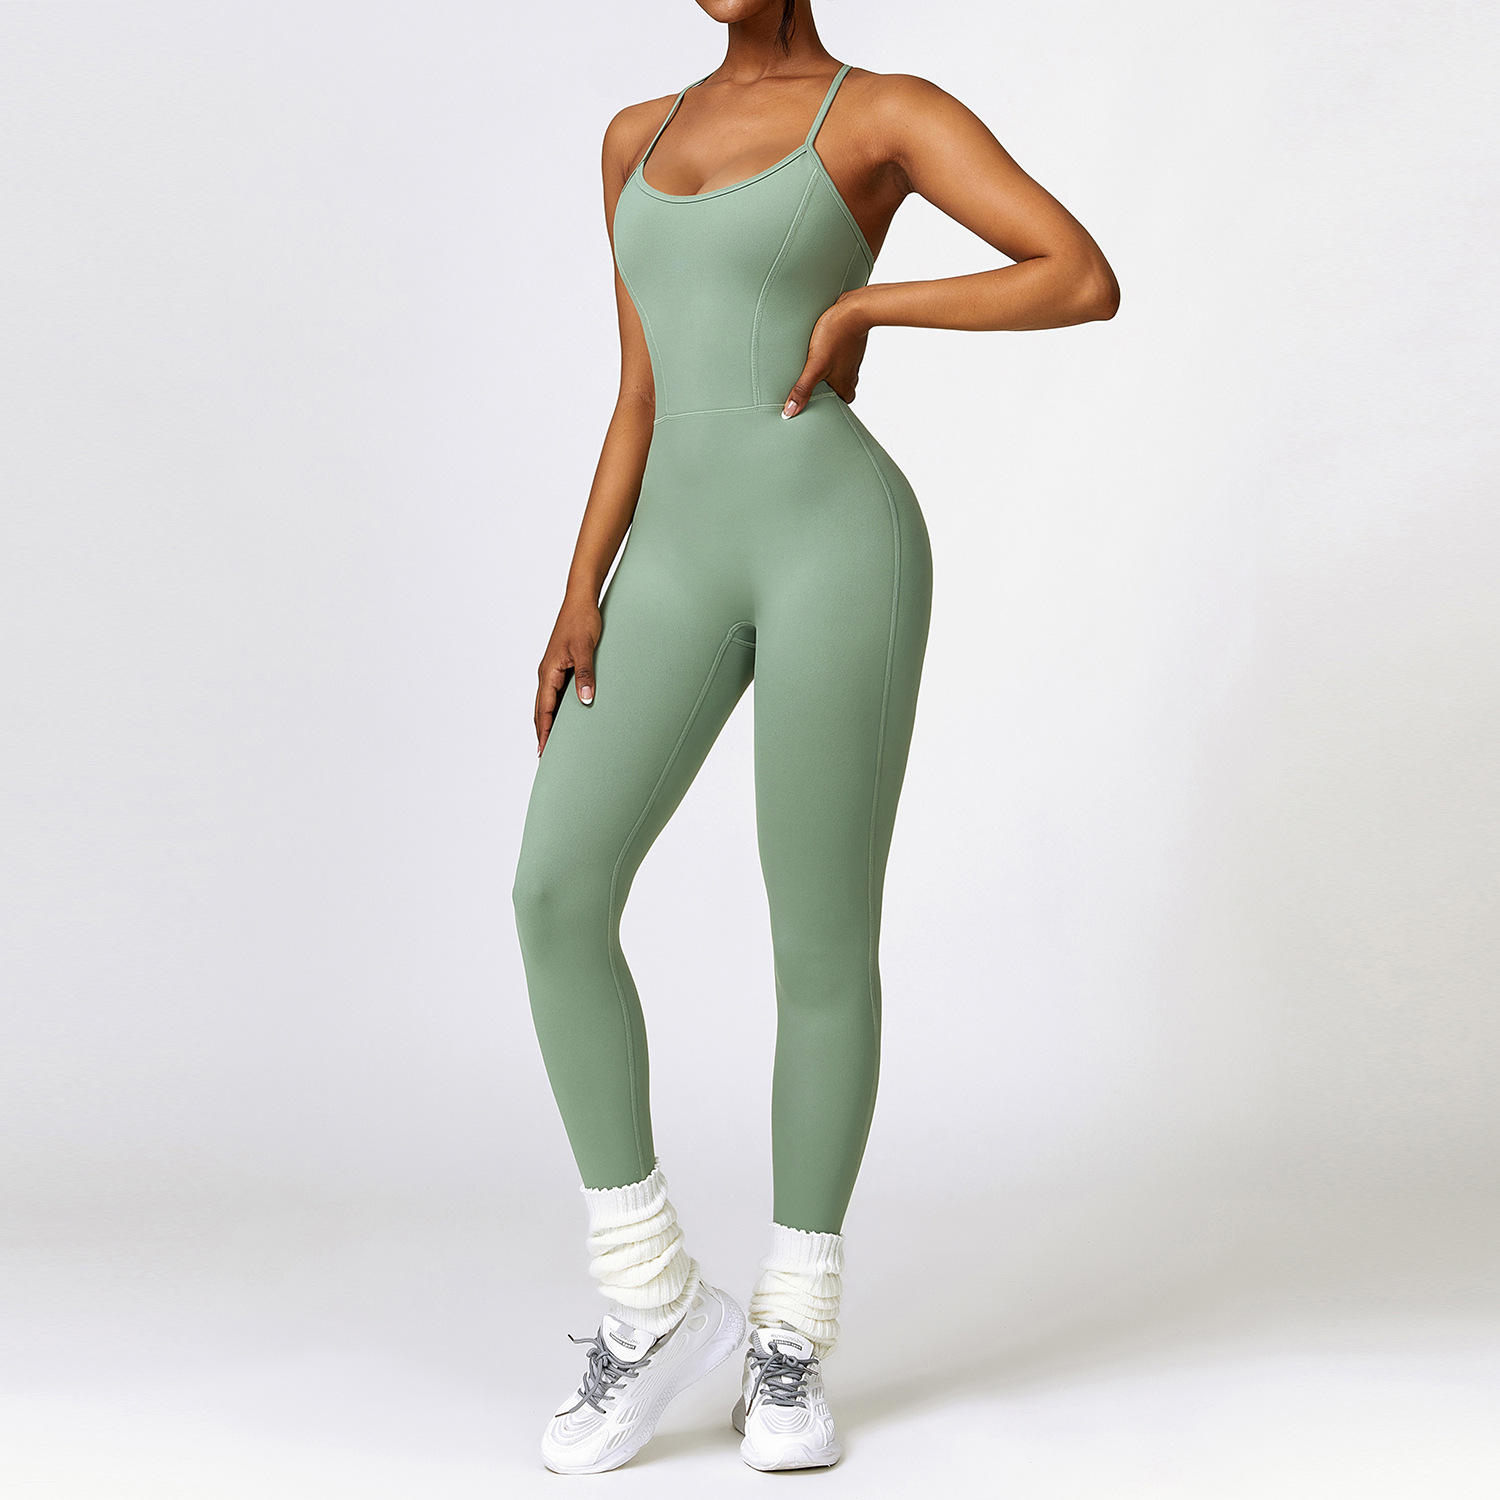 athletic wear manufacturers